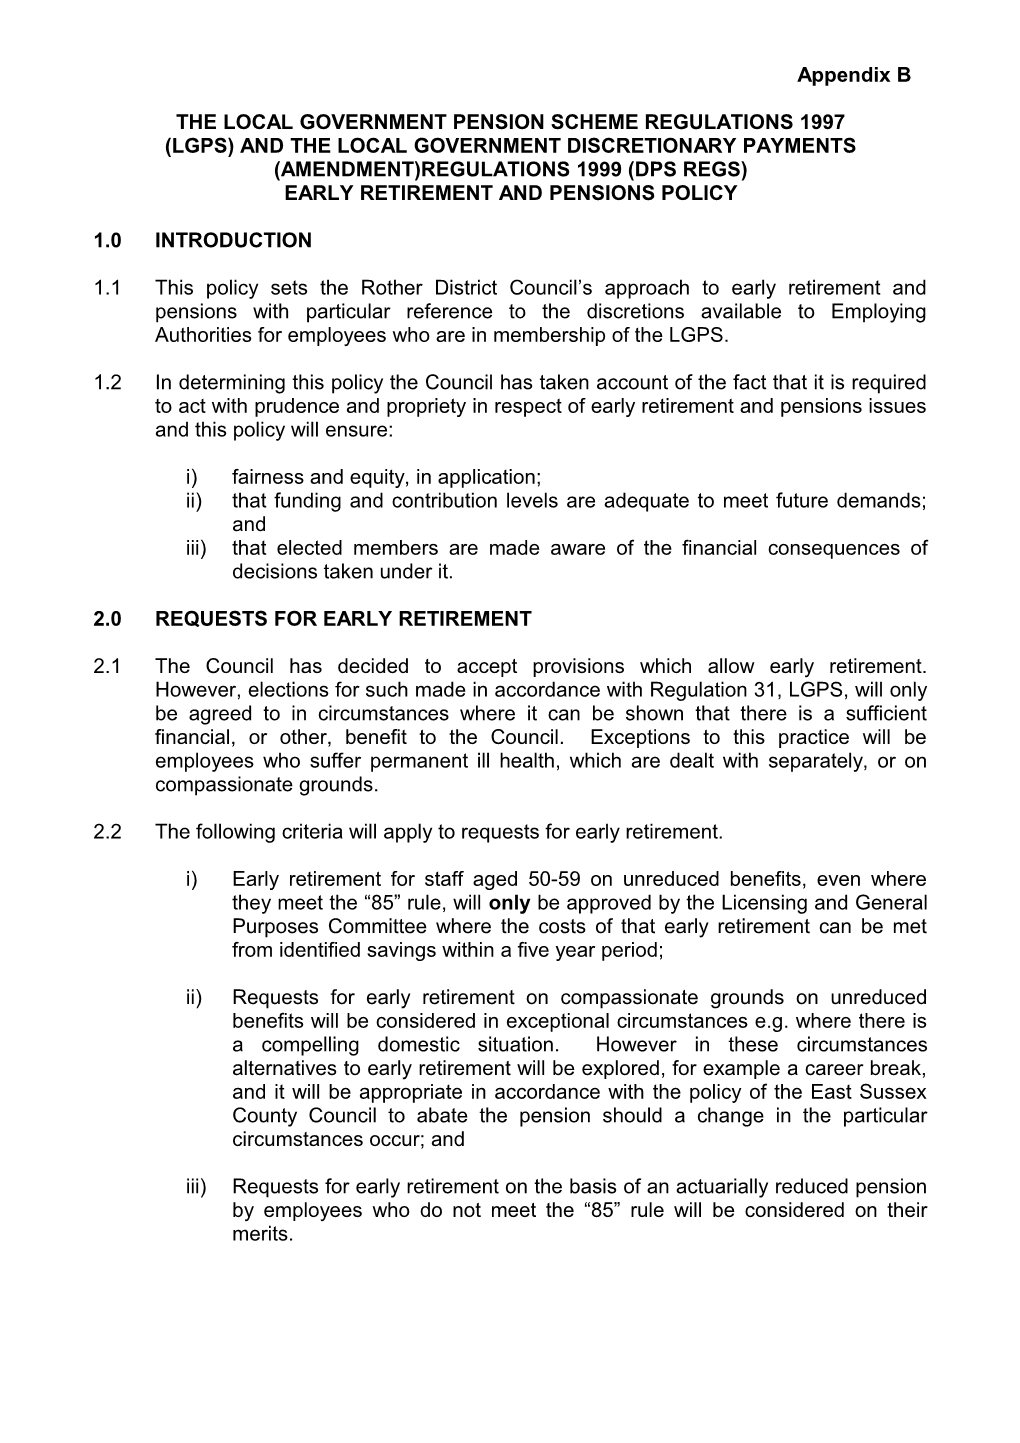 Thelocal Government Pension Scheme Regulations 1997